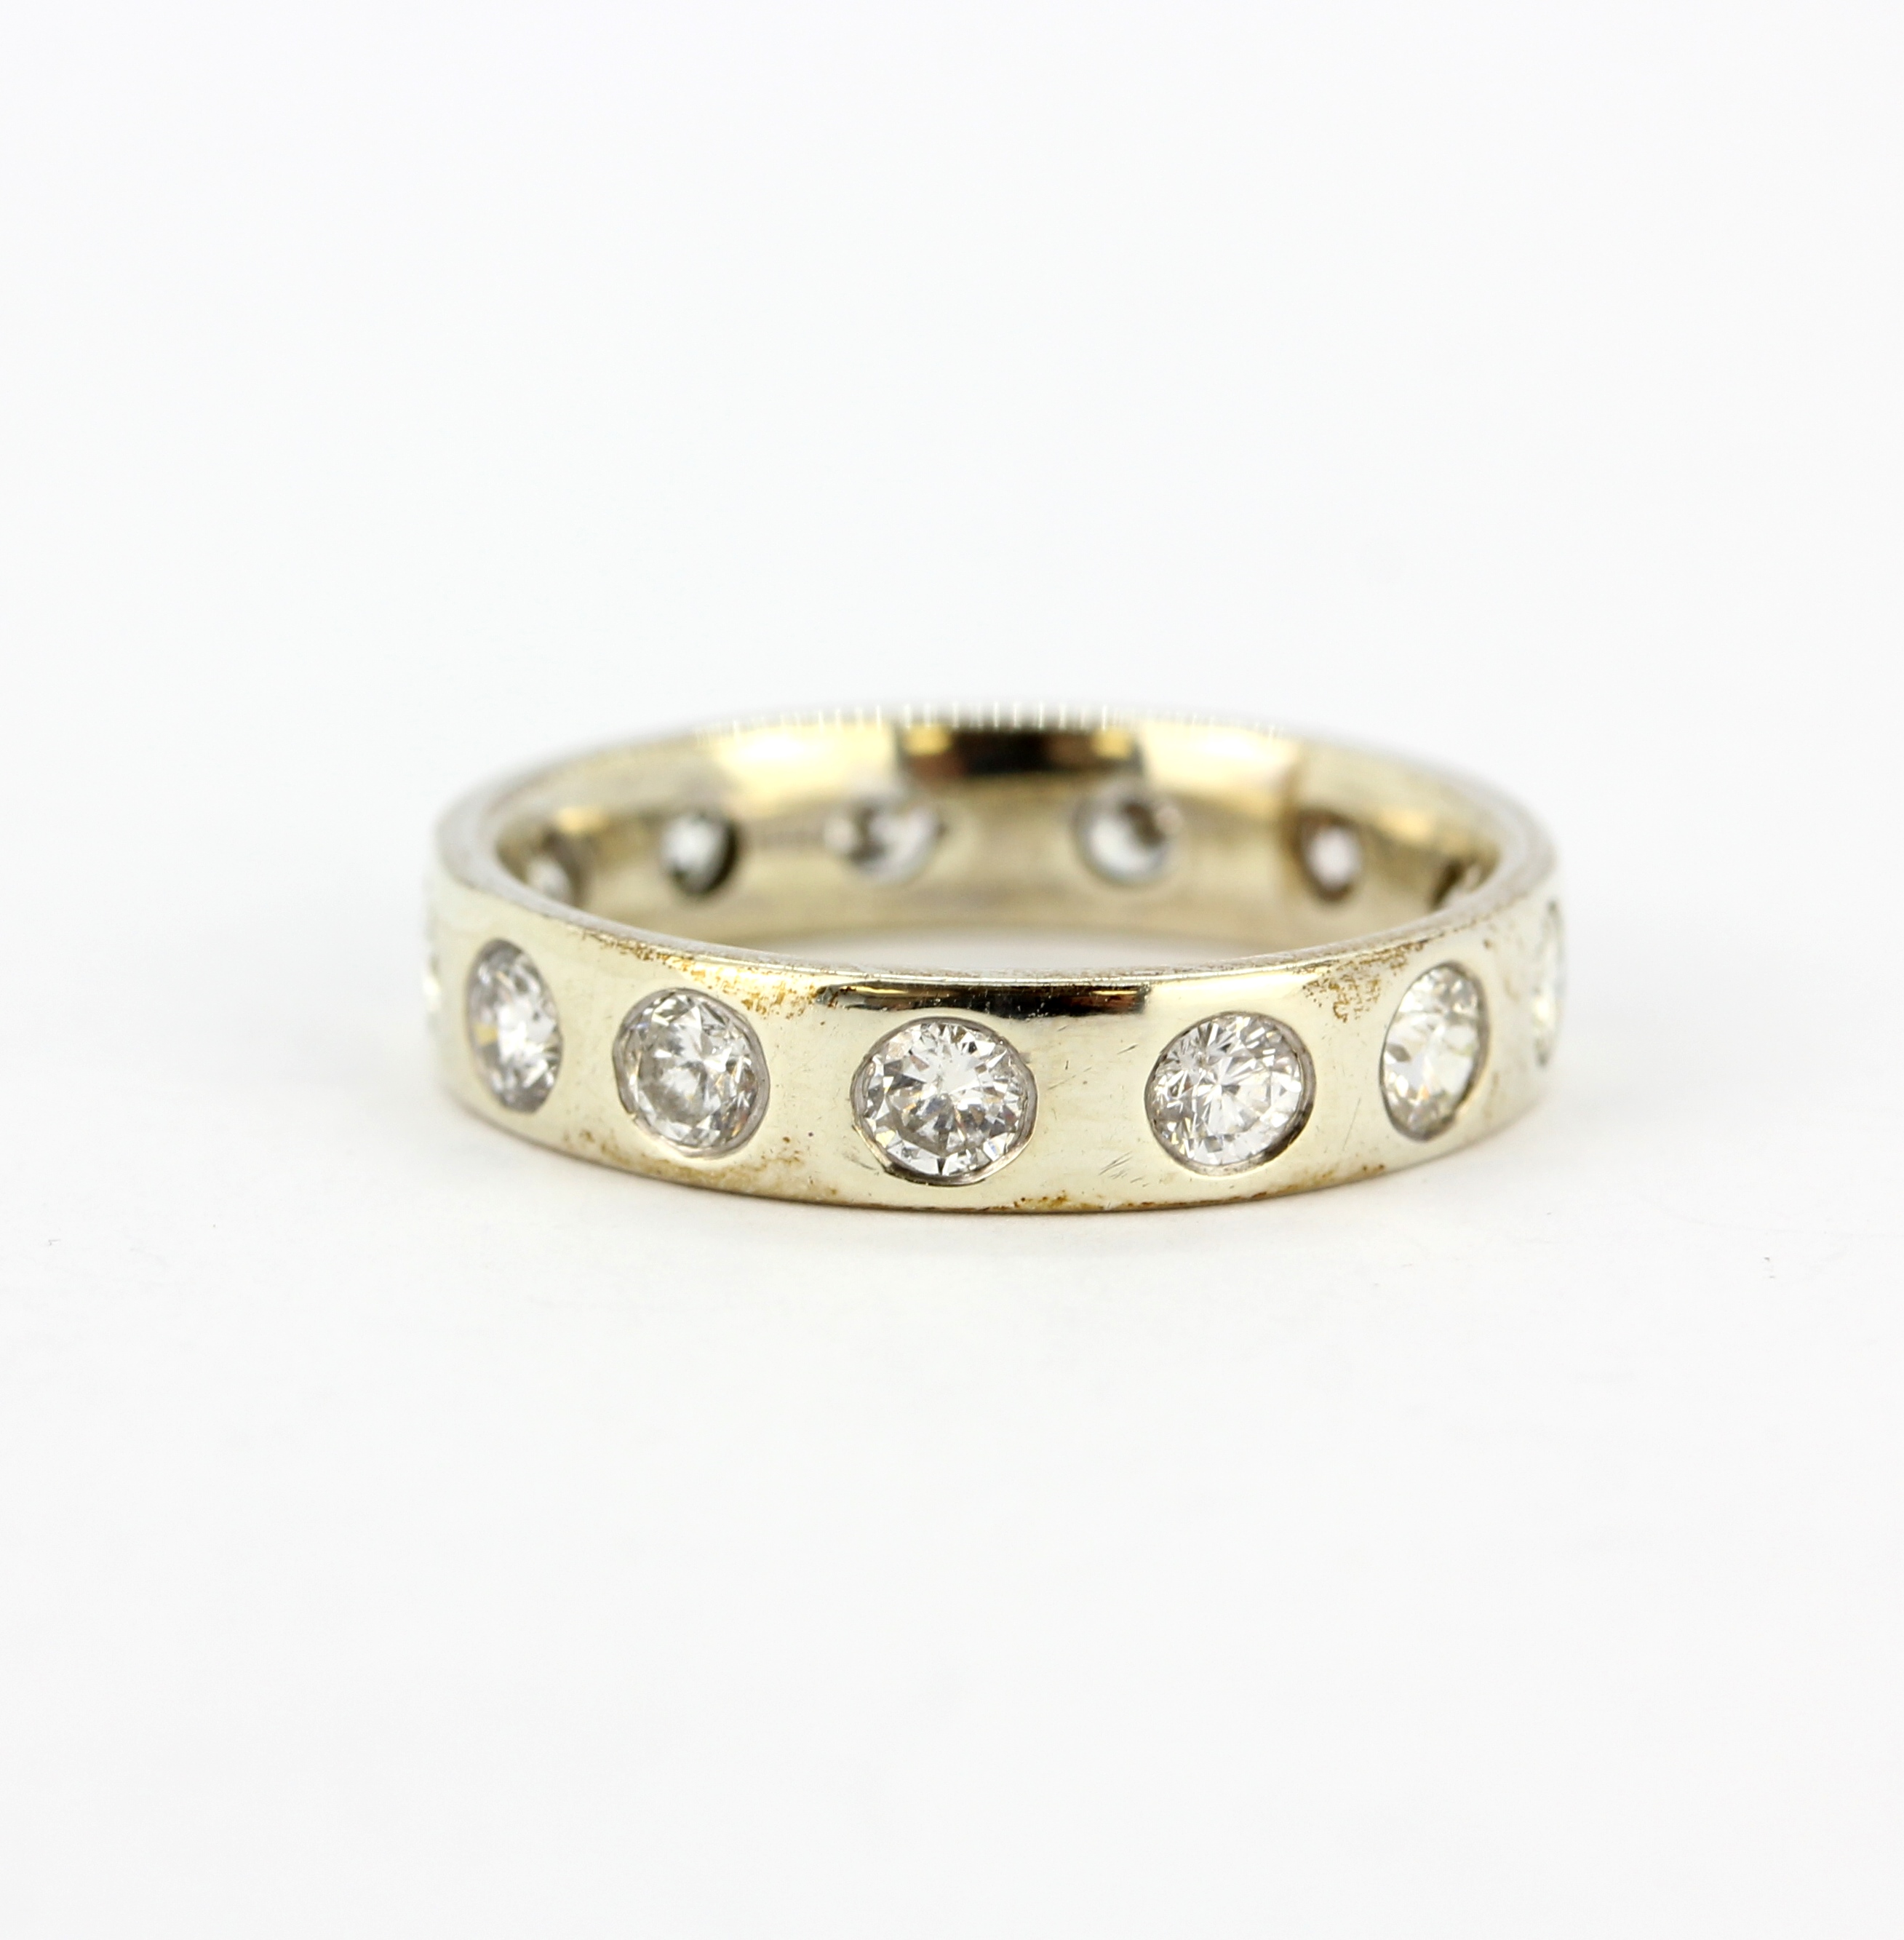 A white metal (tested 14ct gold) full eternity ring set with brlliant cut diamonds, approx. 1ct - Image 2 of 2